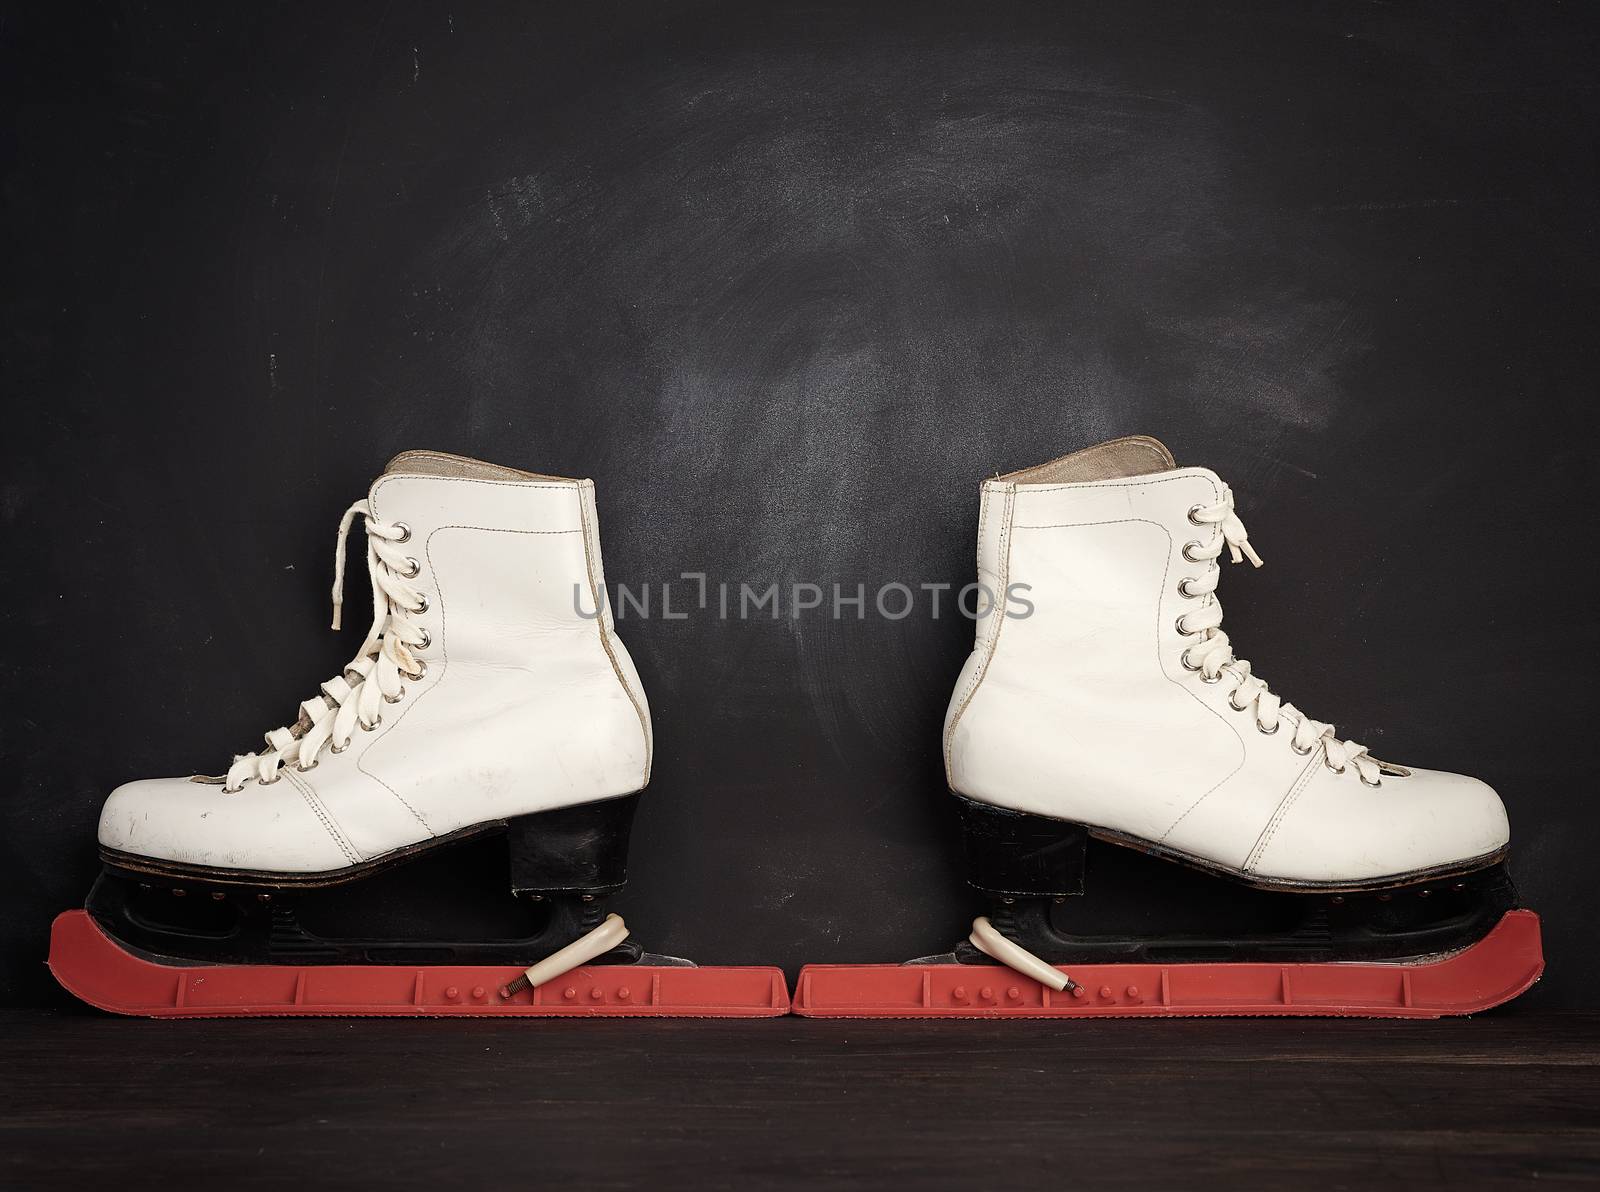 white leather skates for figure skating stand on a brown wooden  by ndanko